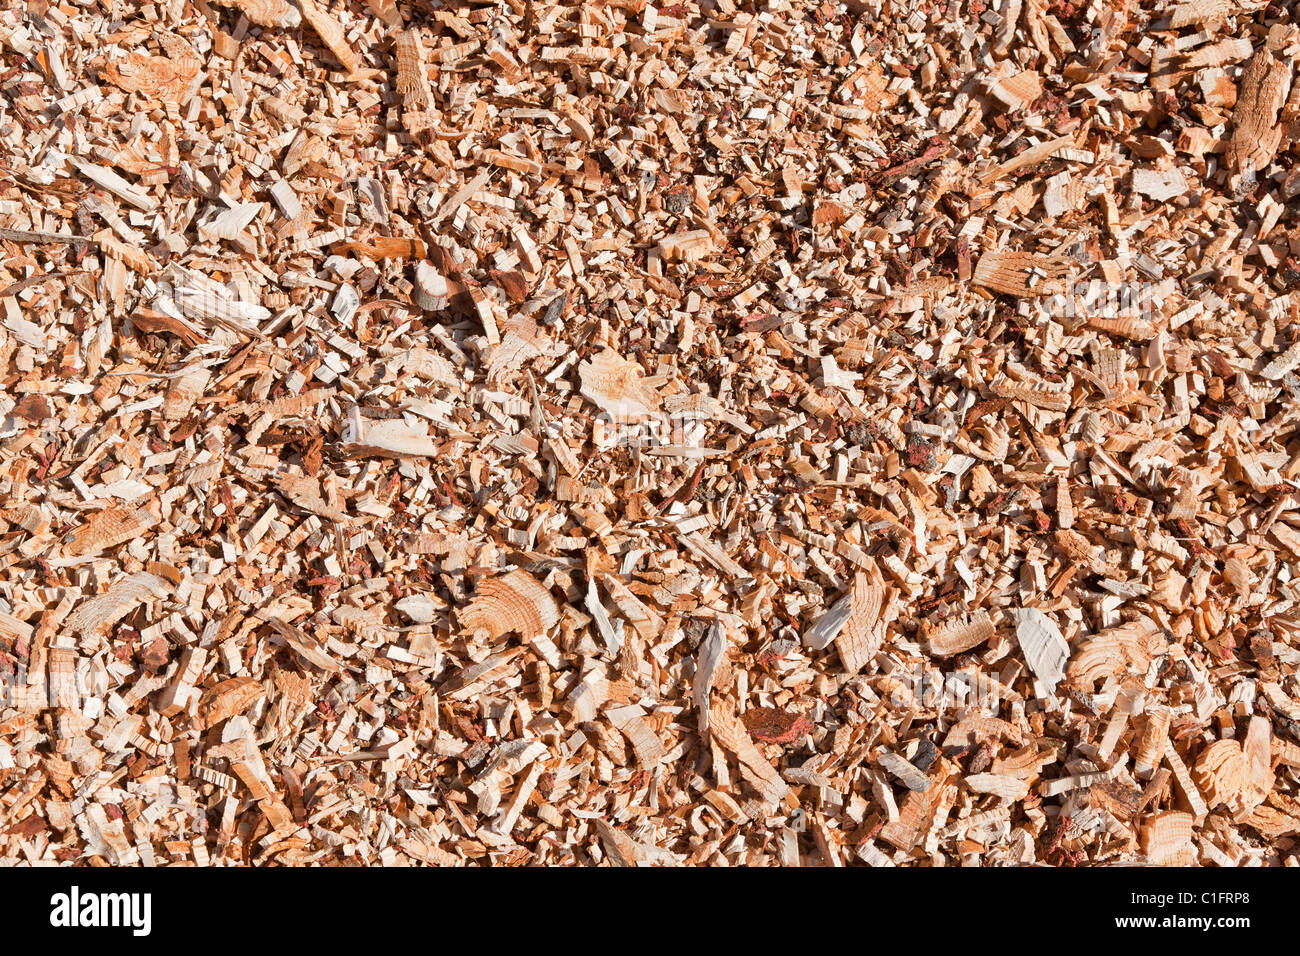 Mulch made of wood chips shot in natural light Stock Photo